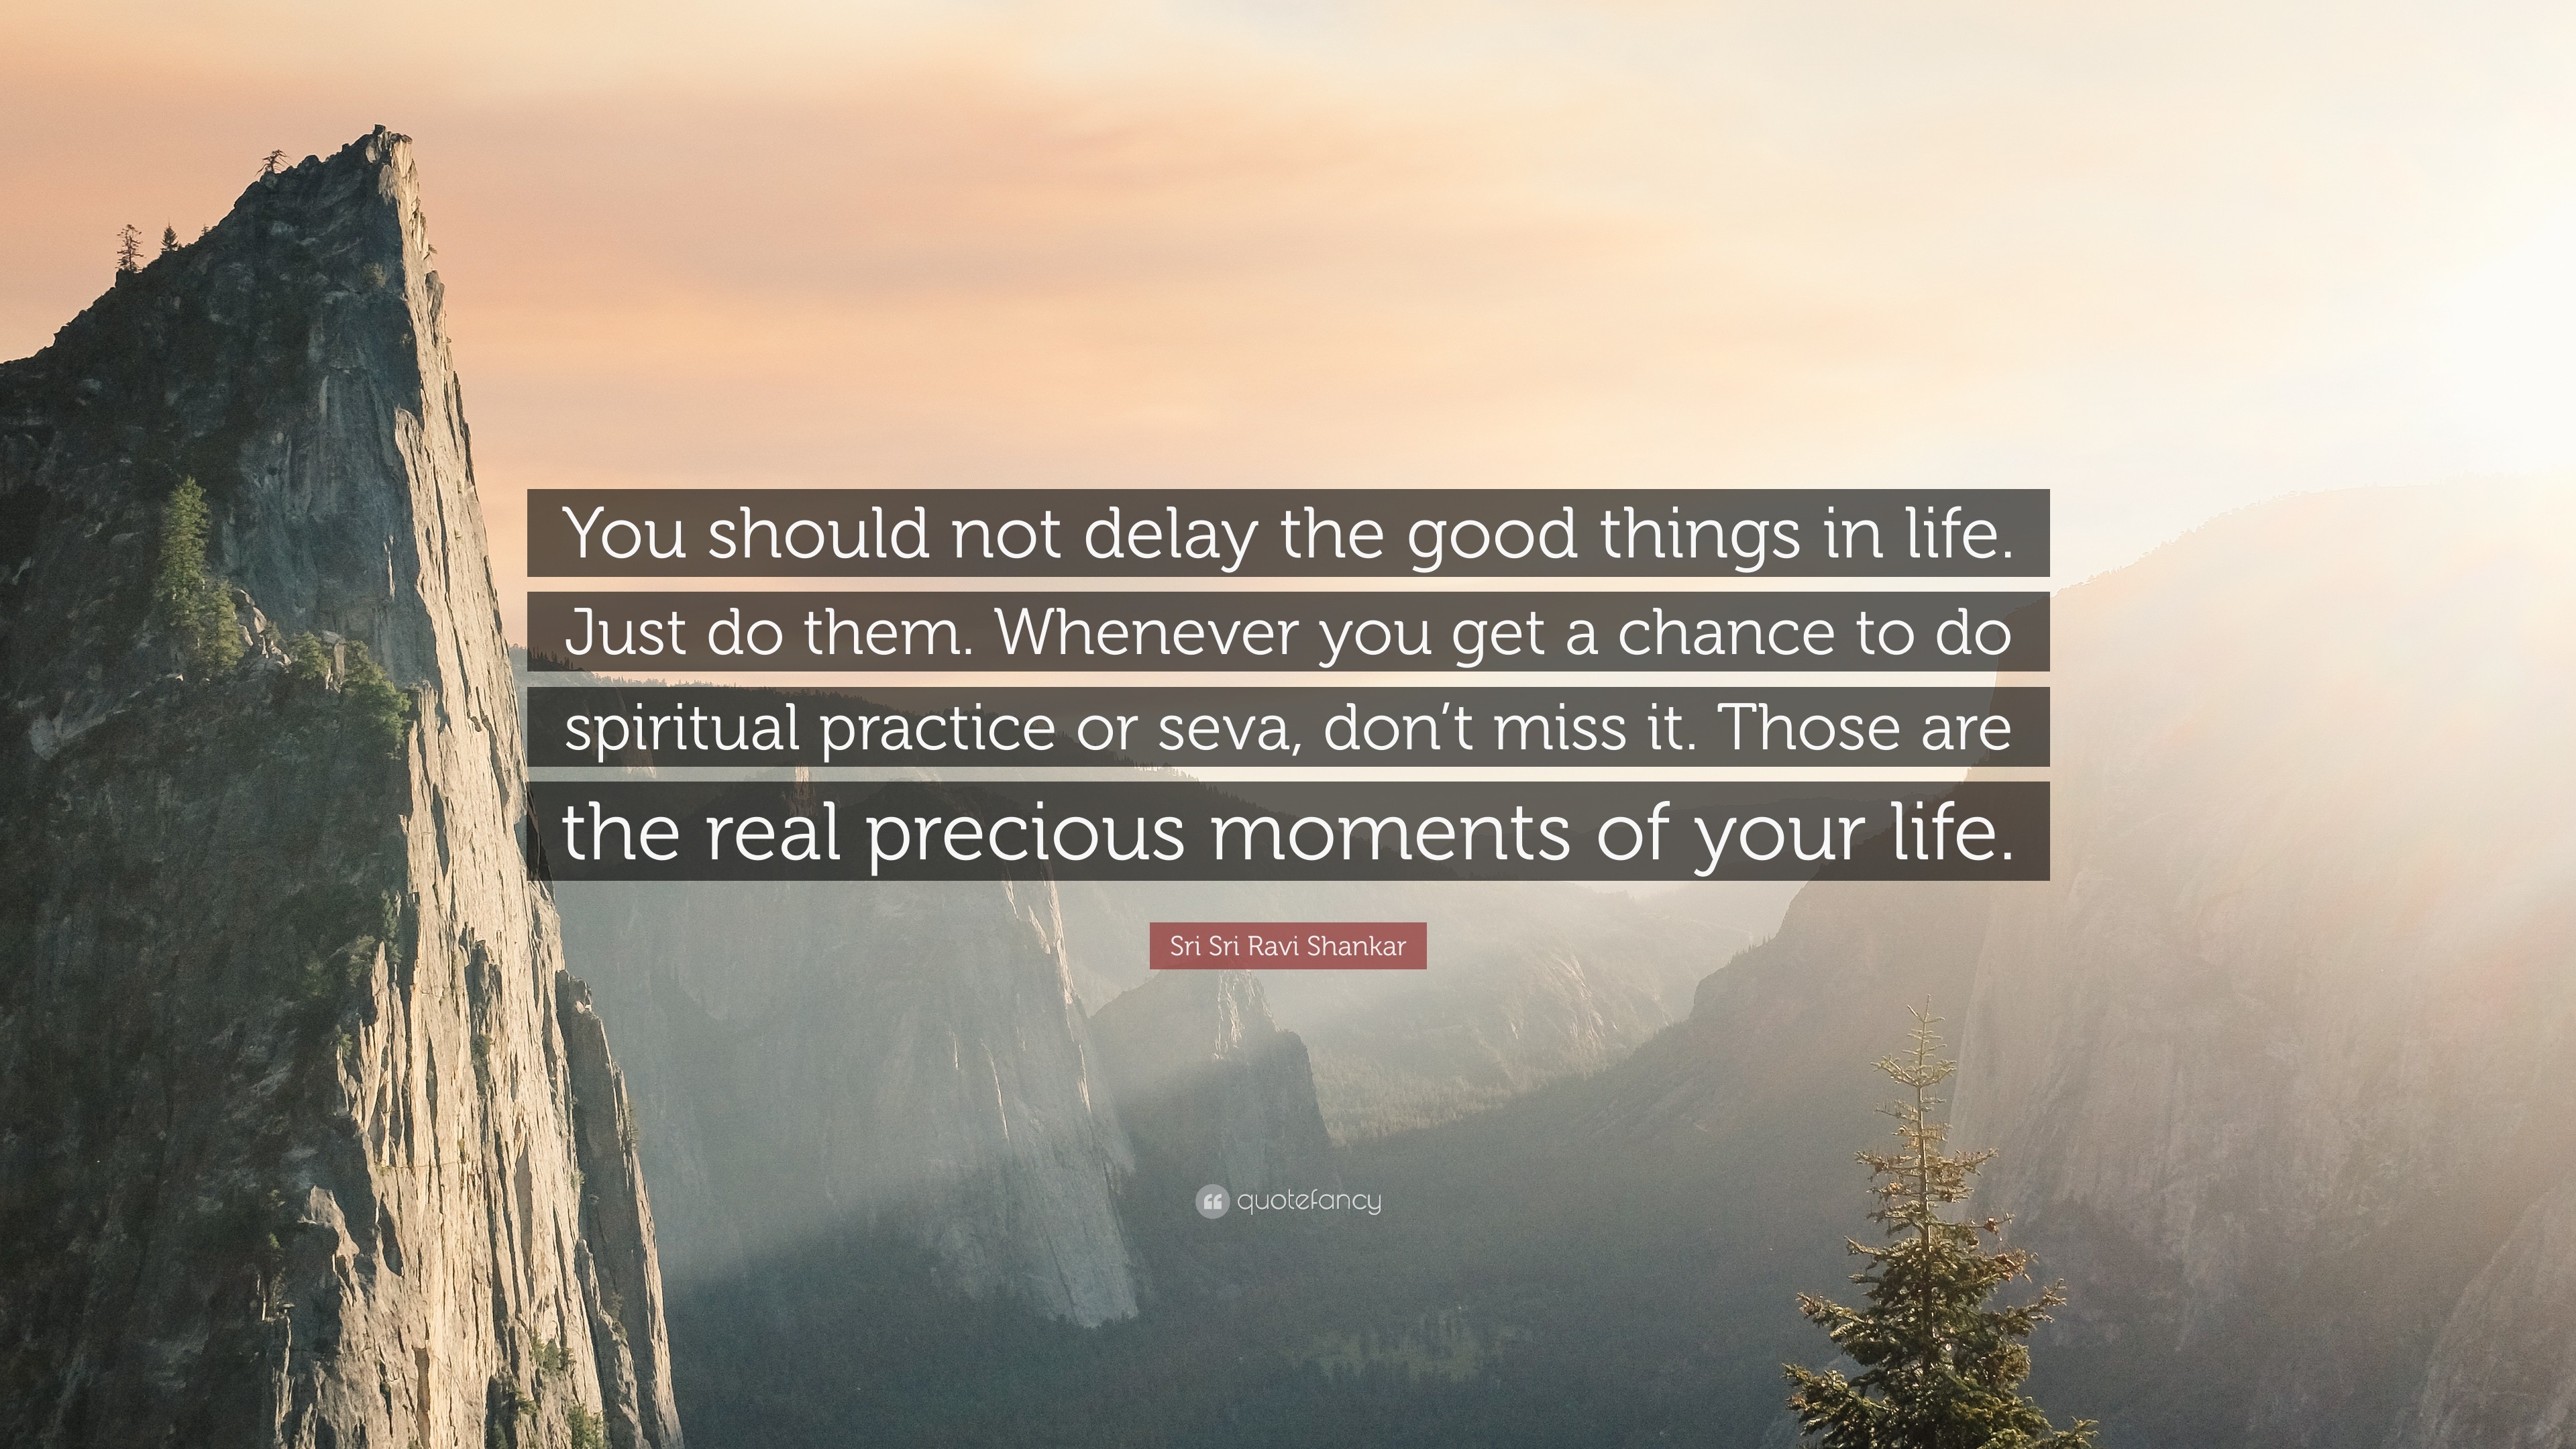 3840x2160 Sri Sri Ravi Shankar Quote: “You should not delay the good things in life